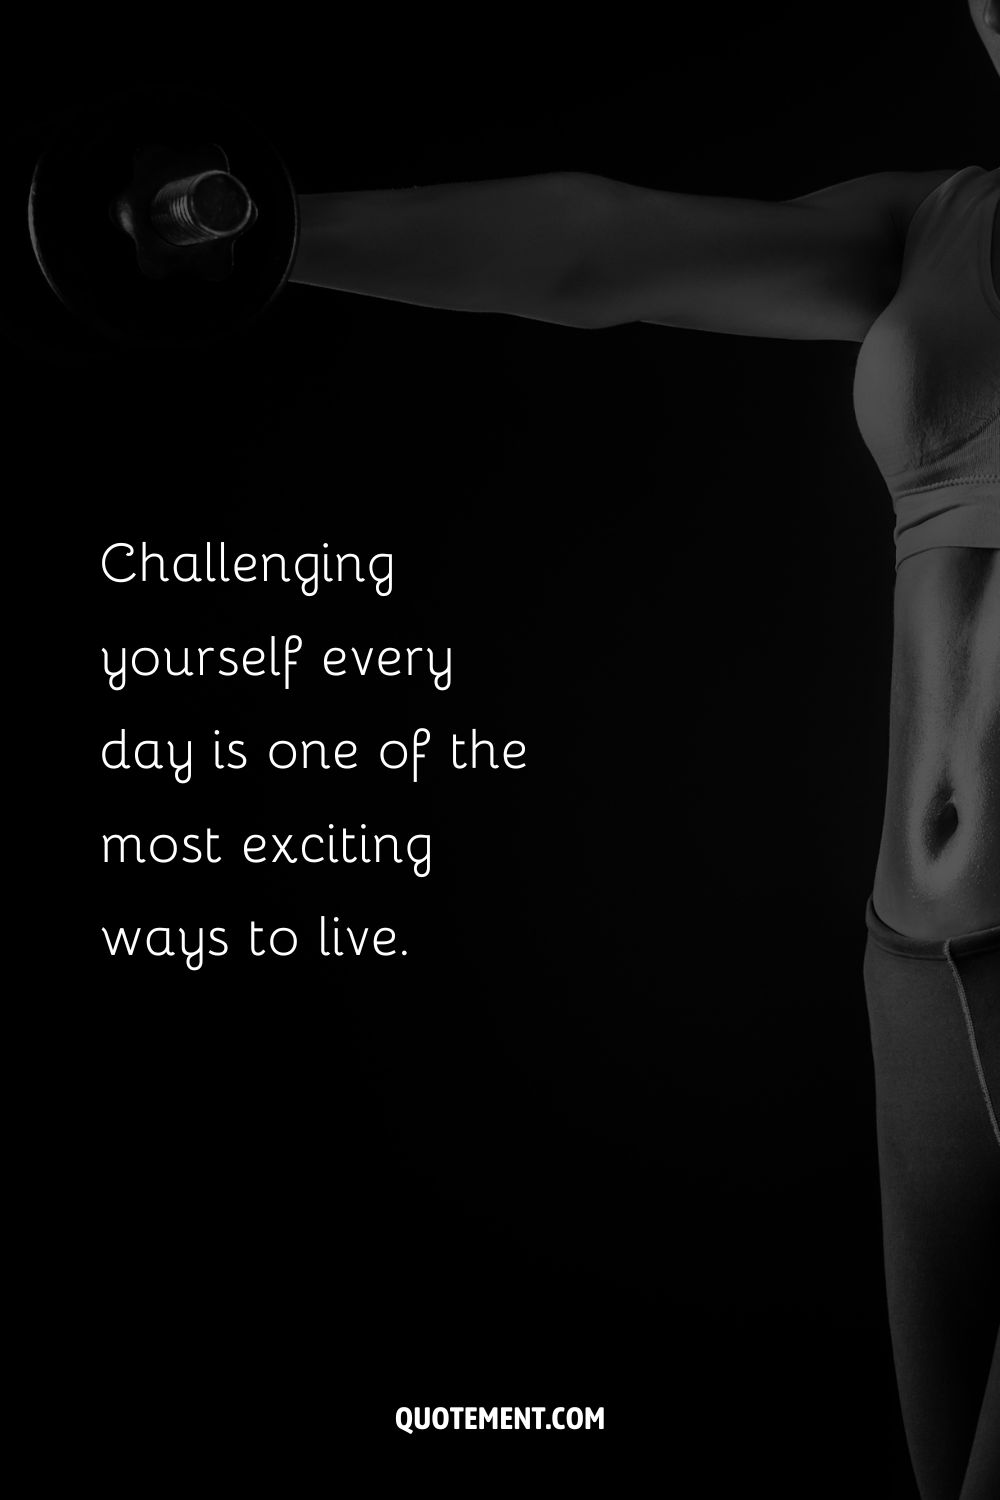 Challenging yourself every day is one of the most exciting ways to live